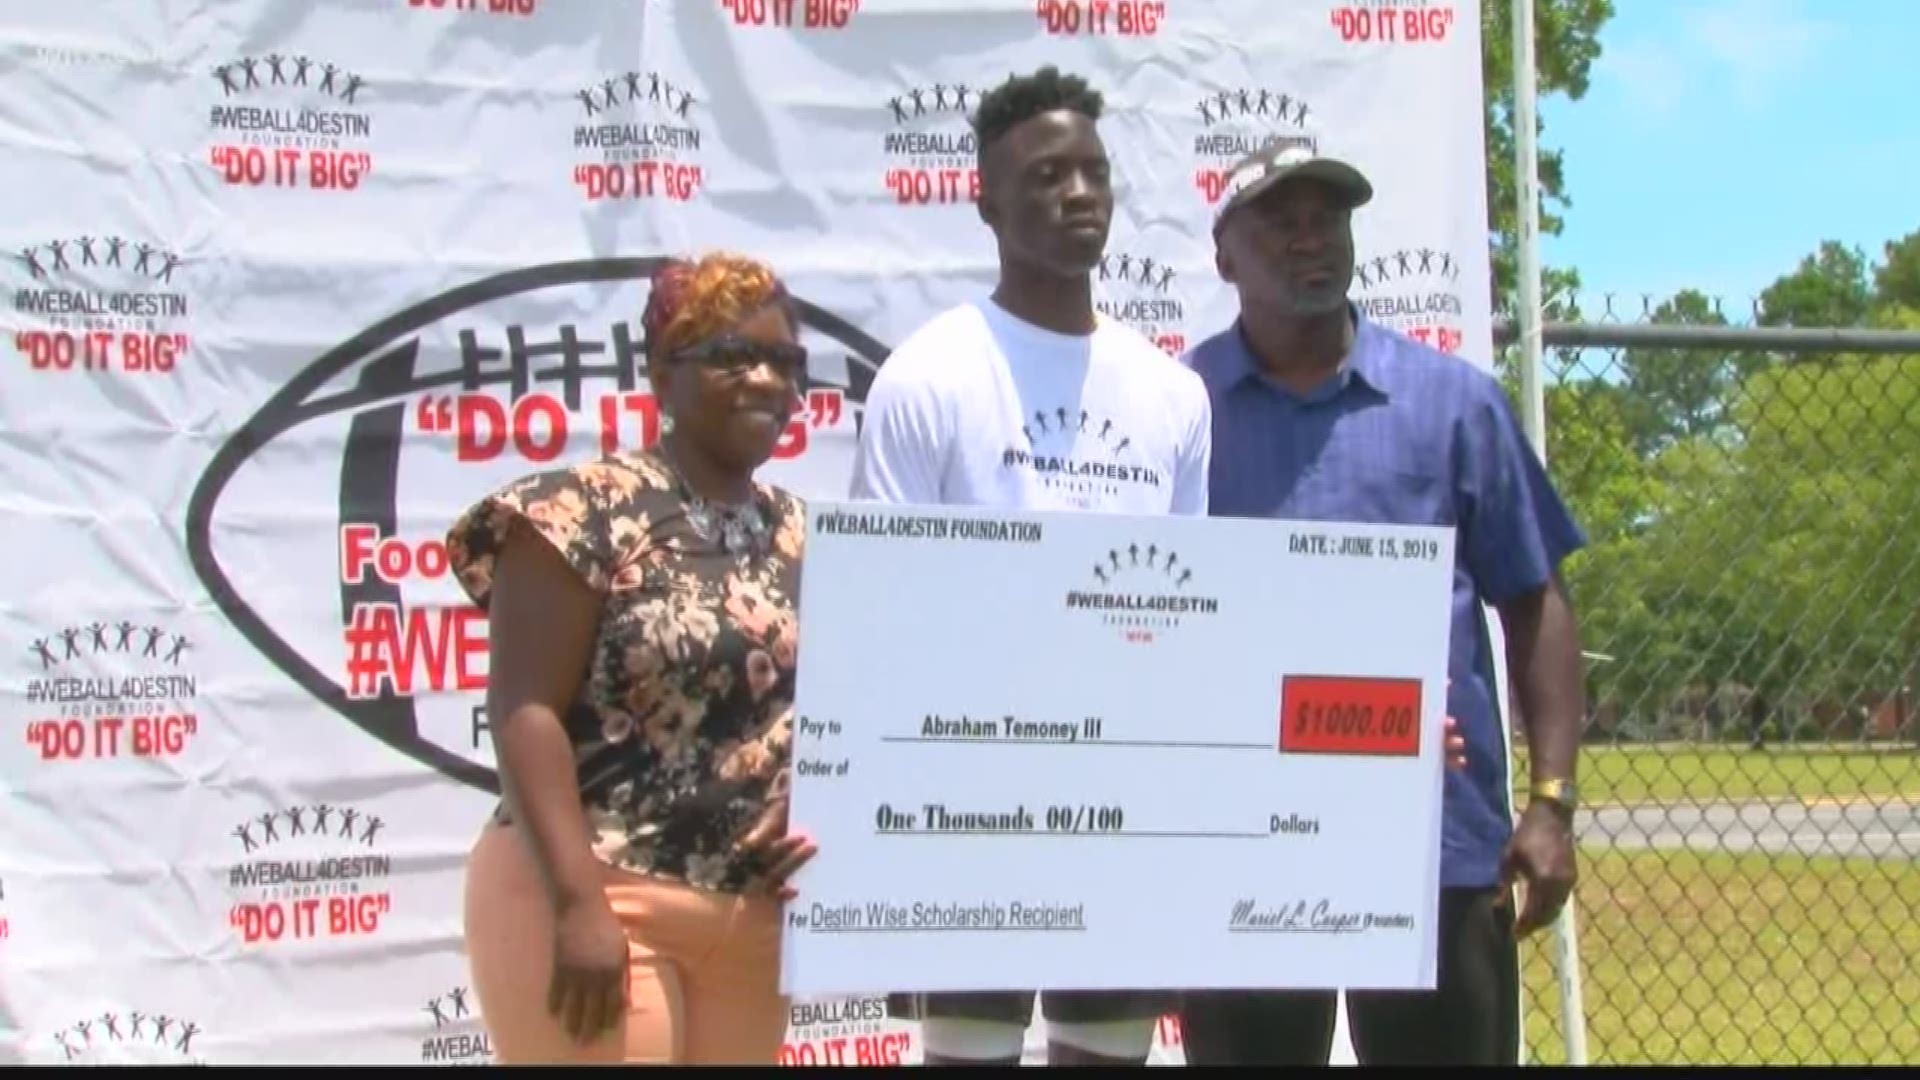 Former Citadel and SC State Bulldog Mariel Cooper hosts the 4th Annual WeBall4Destin Football tournament to honor his later brother Destin Wise of Sumter High School. For the first time the WeBall4Destin Foundation was able to give out two $1,000 scholarships.